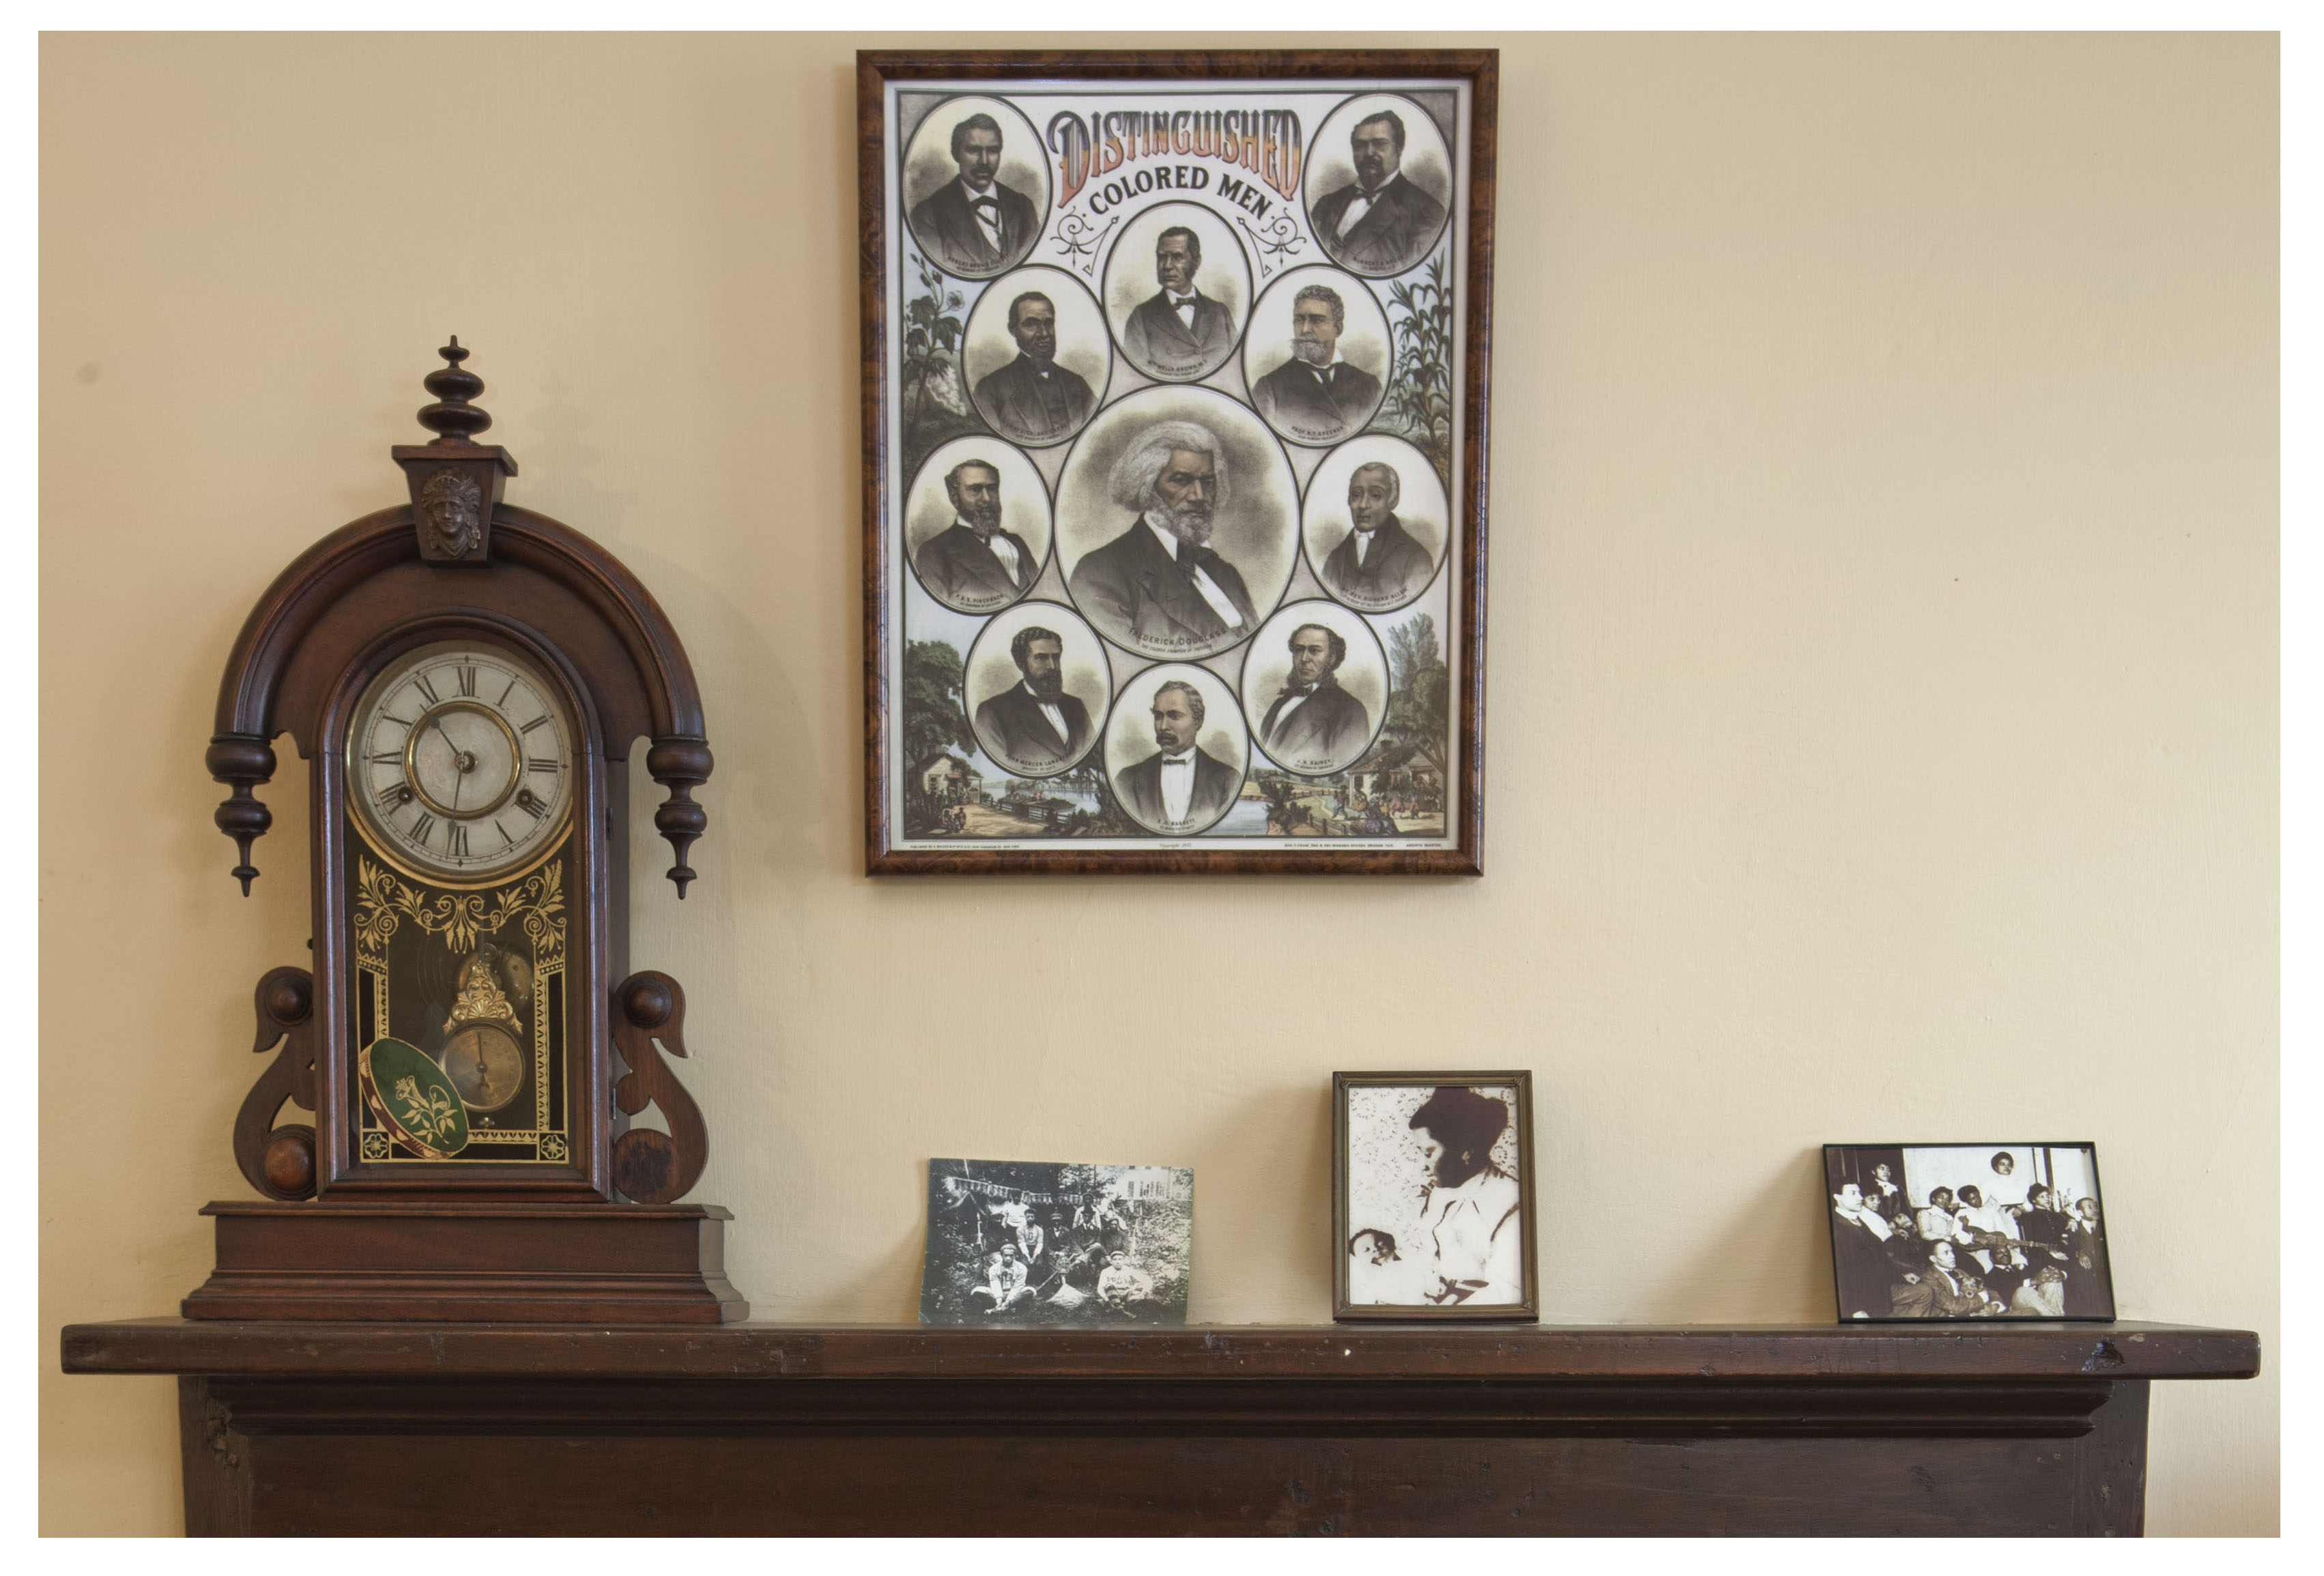 Mantelpiece with family photographs and a hand-colored lithograph of 'Distinguished Colored Men'